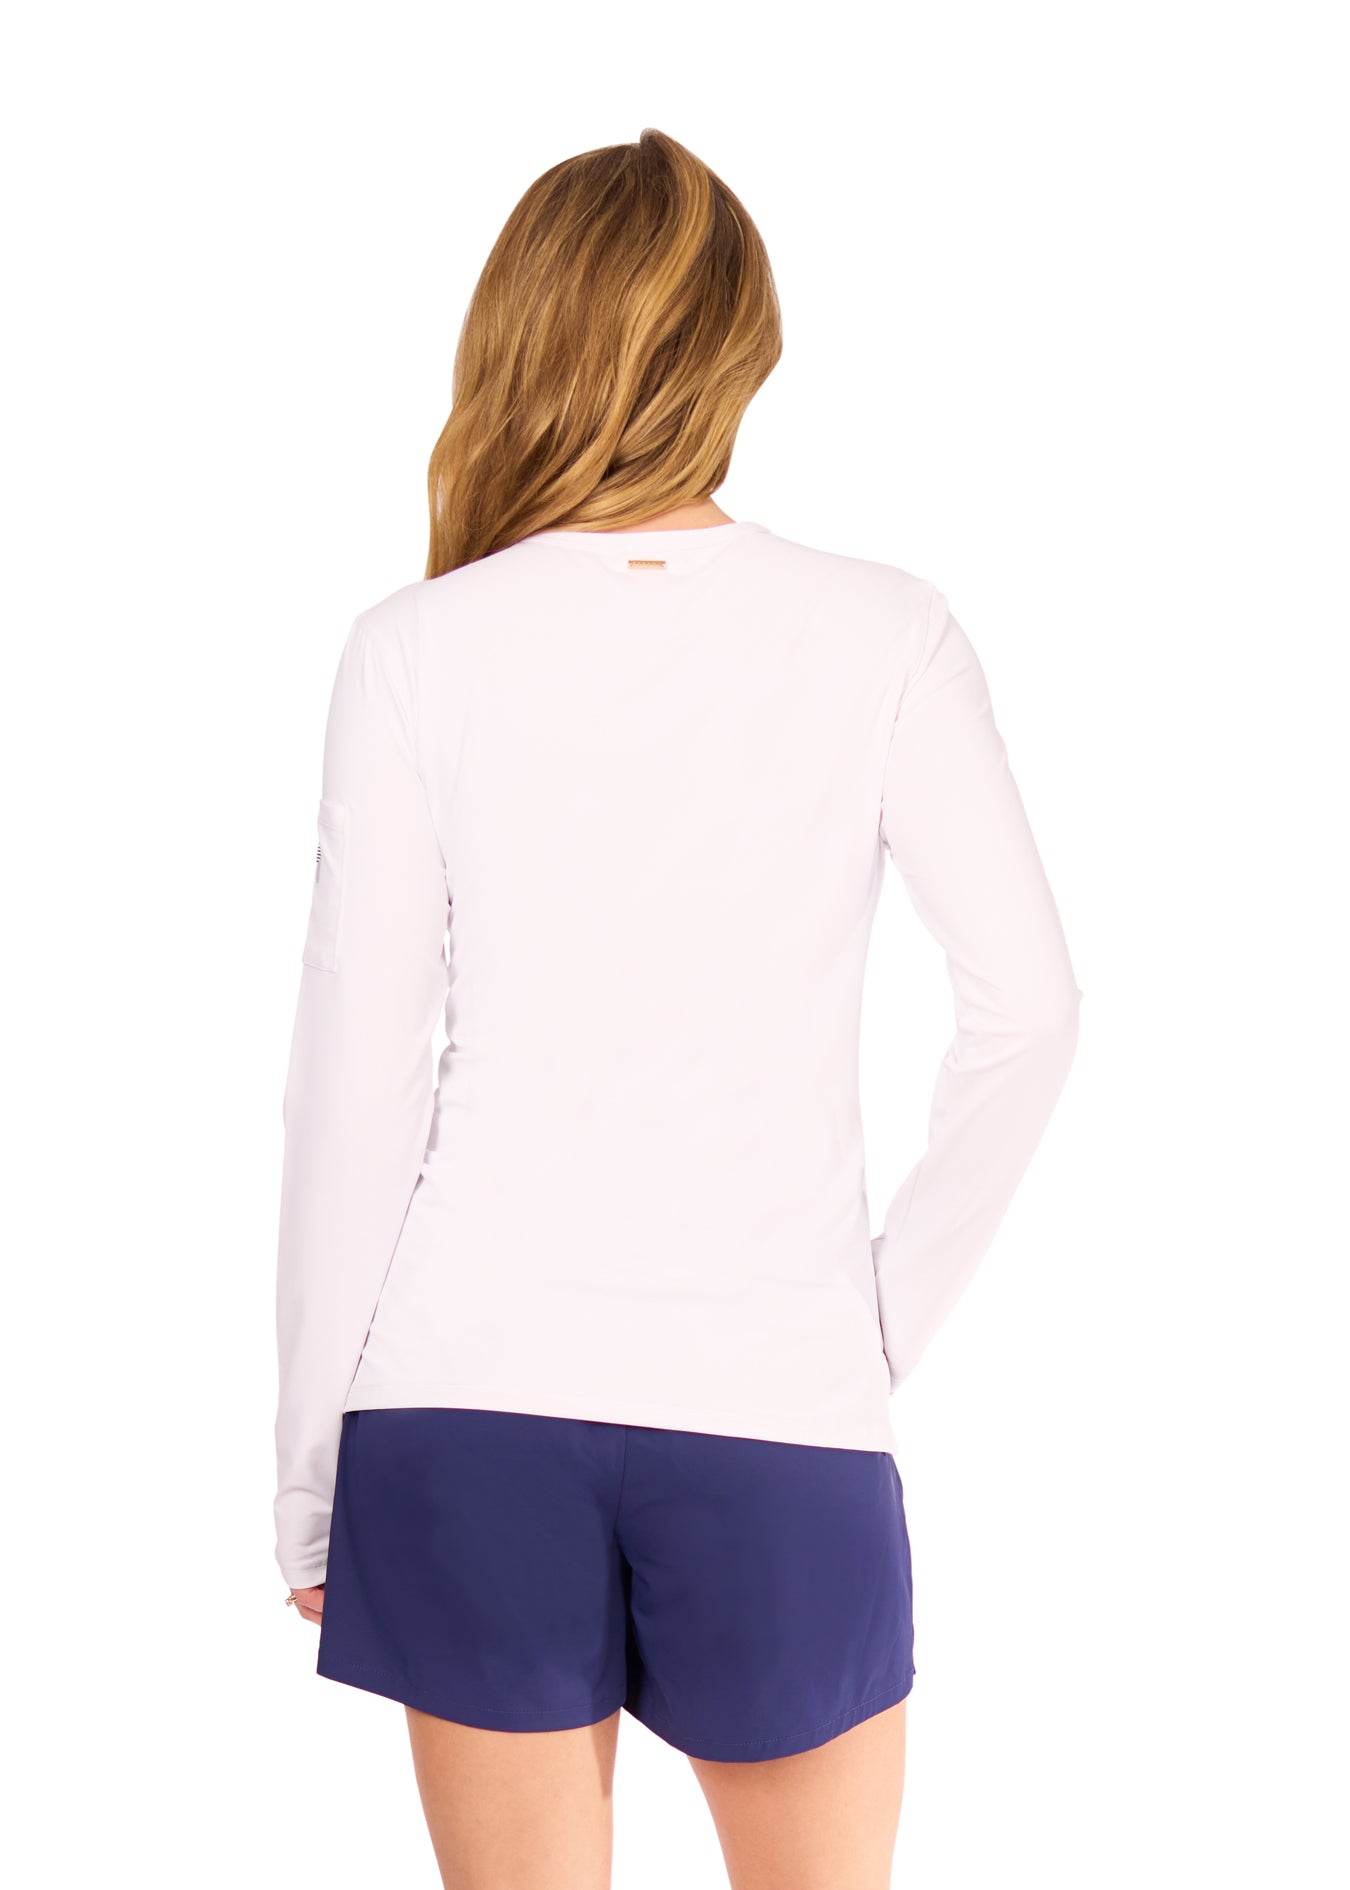 Back of woman in White Sun Shirt and Navy Performance Short